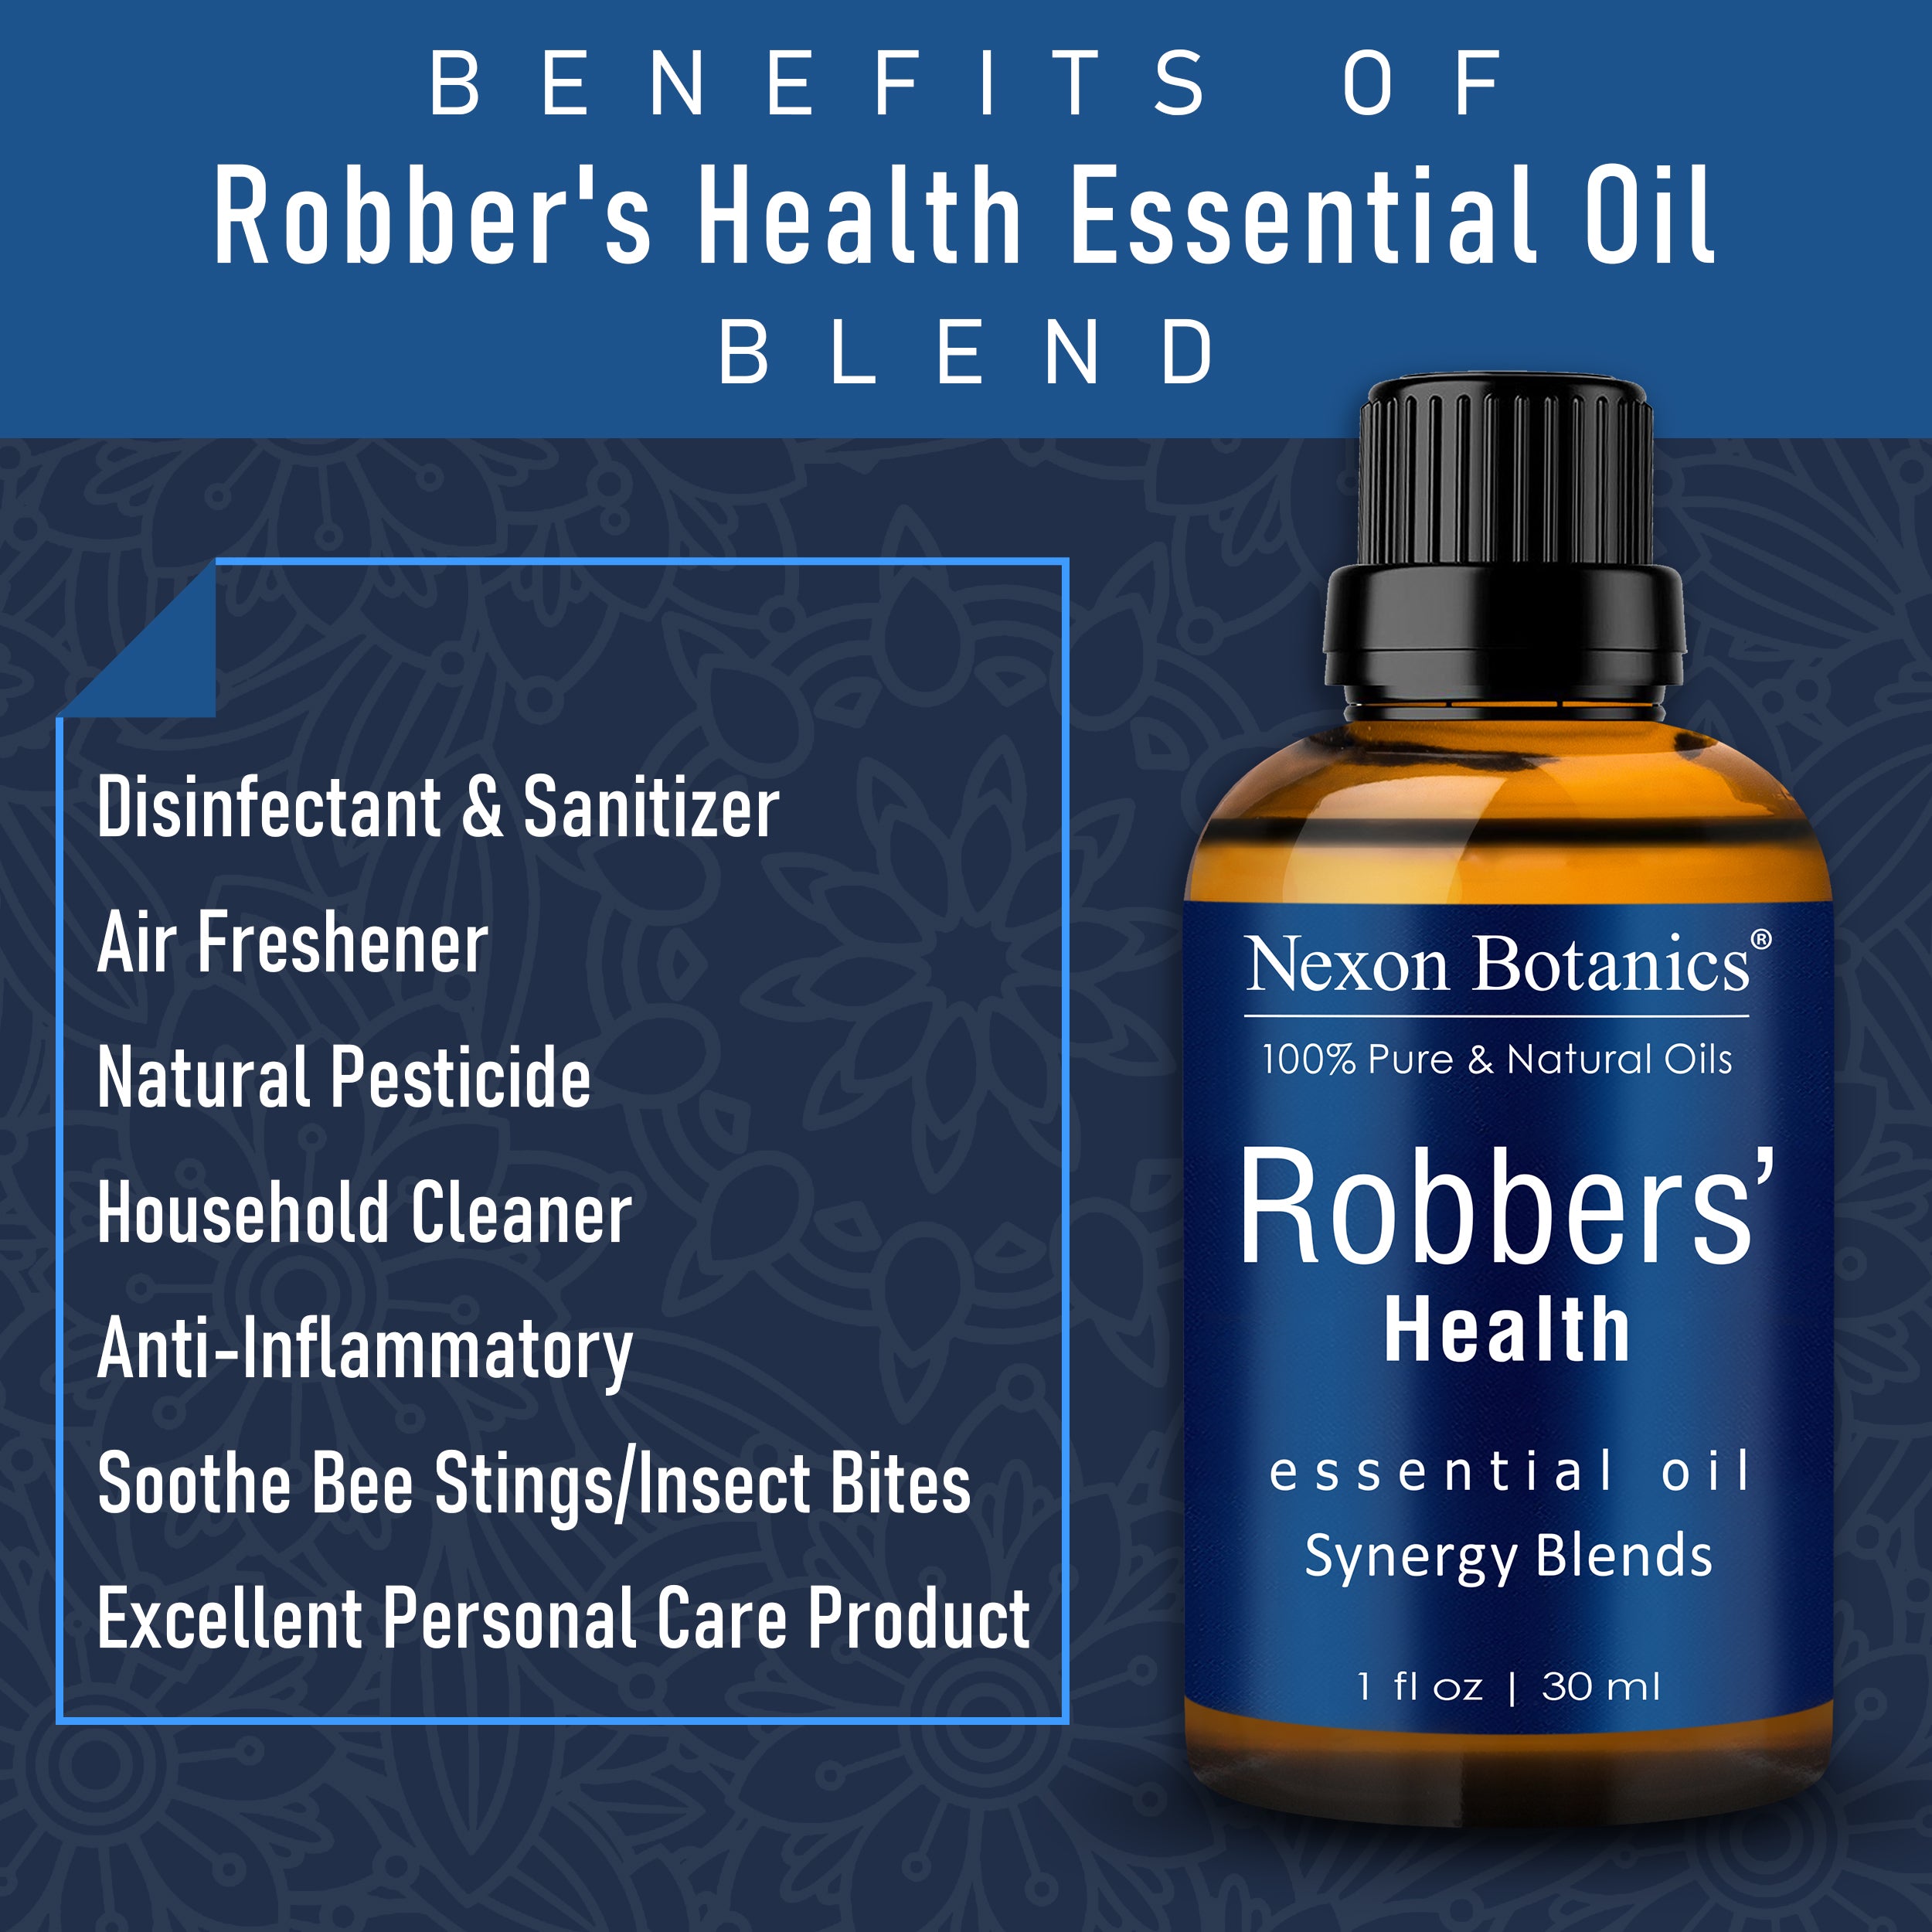 Robbers' Relief: 30ml. (Compare to Thieves by Young Living). A Powerful & Therapeutic Combination of 5 Essential Oils: Clove, Cinnamon, Lemon